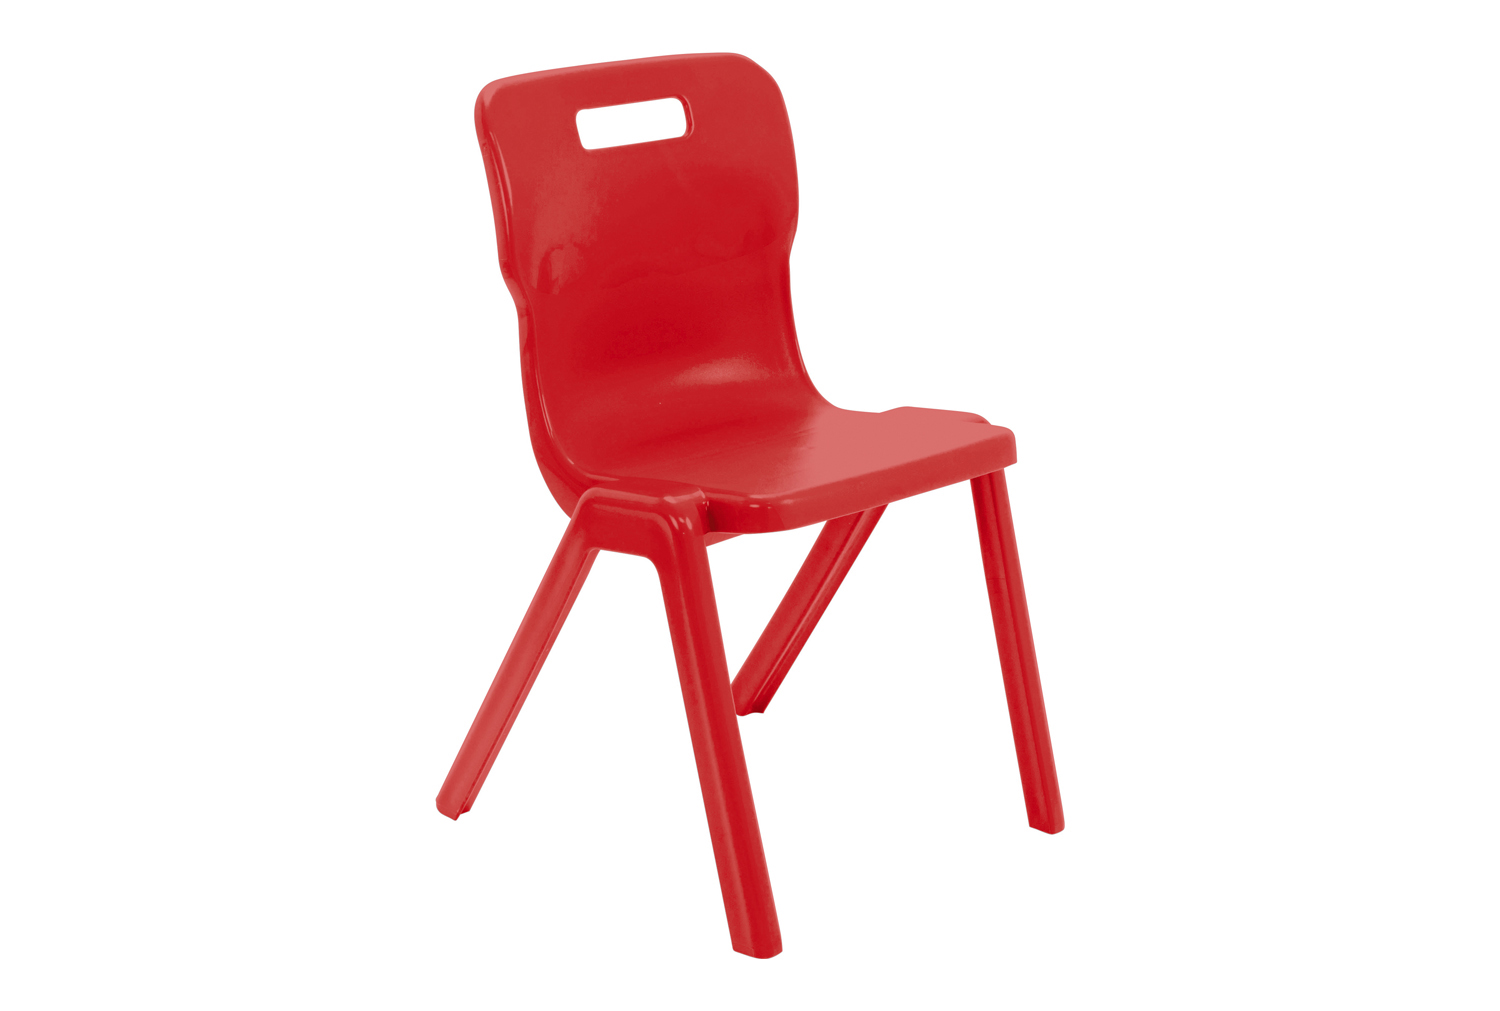 Titan One Piece Classroom Chair, 8- 9 Years - 34wx33dx38h (cm), Red